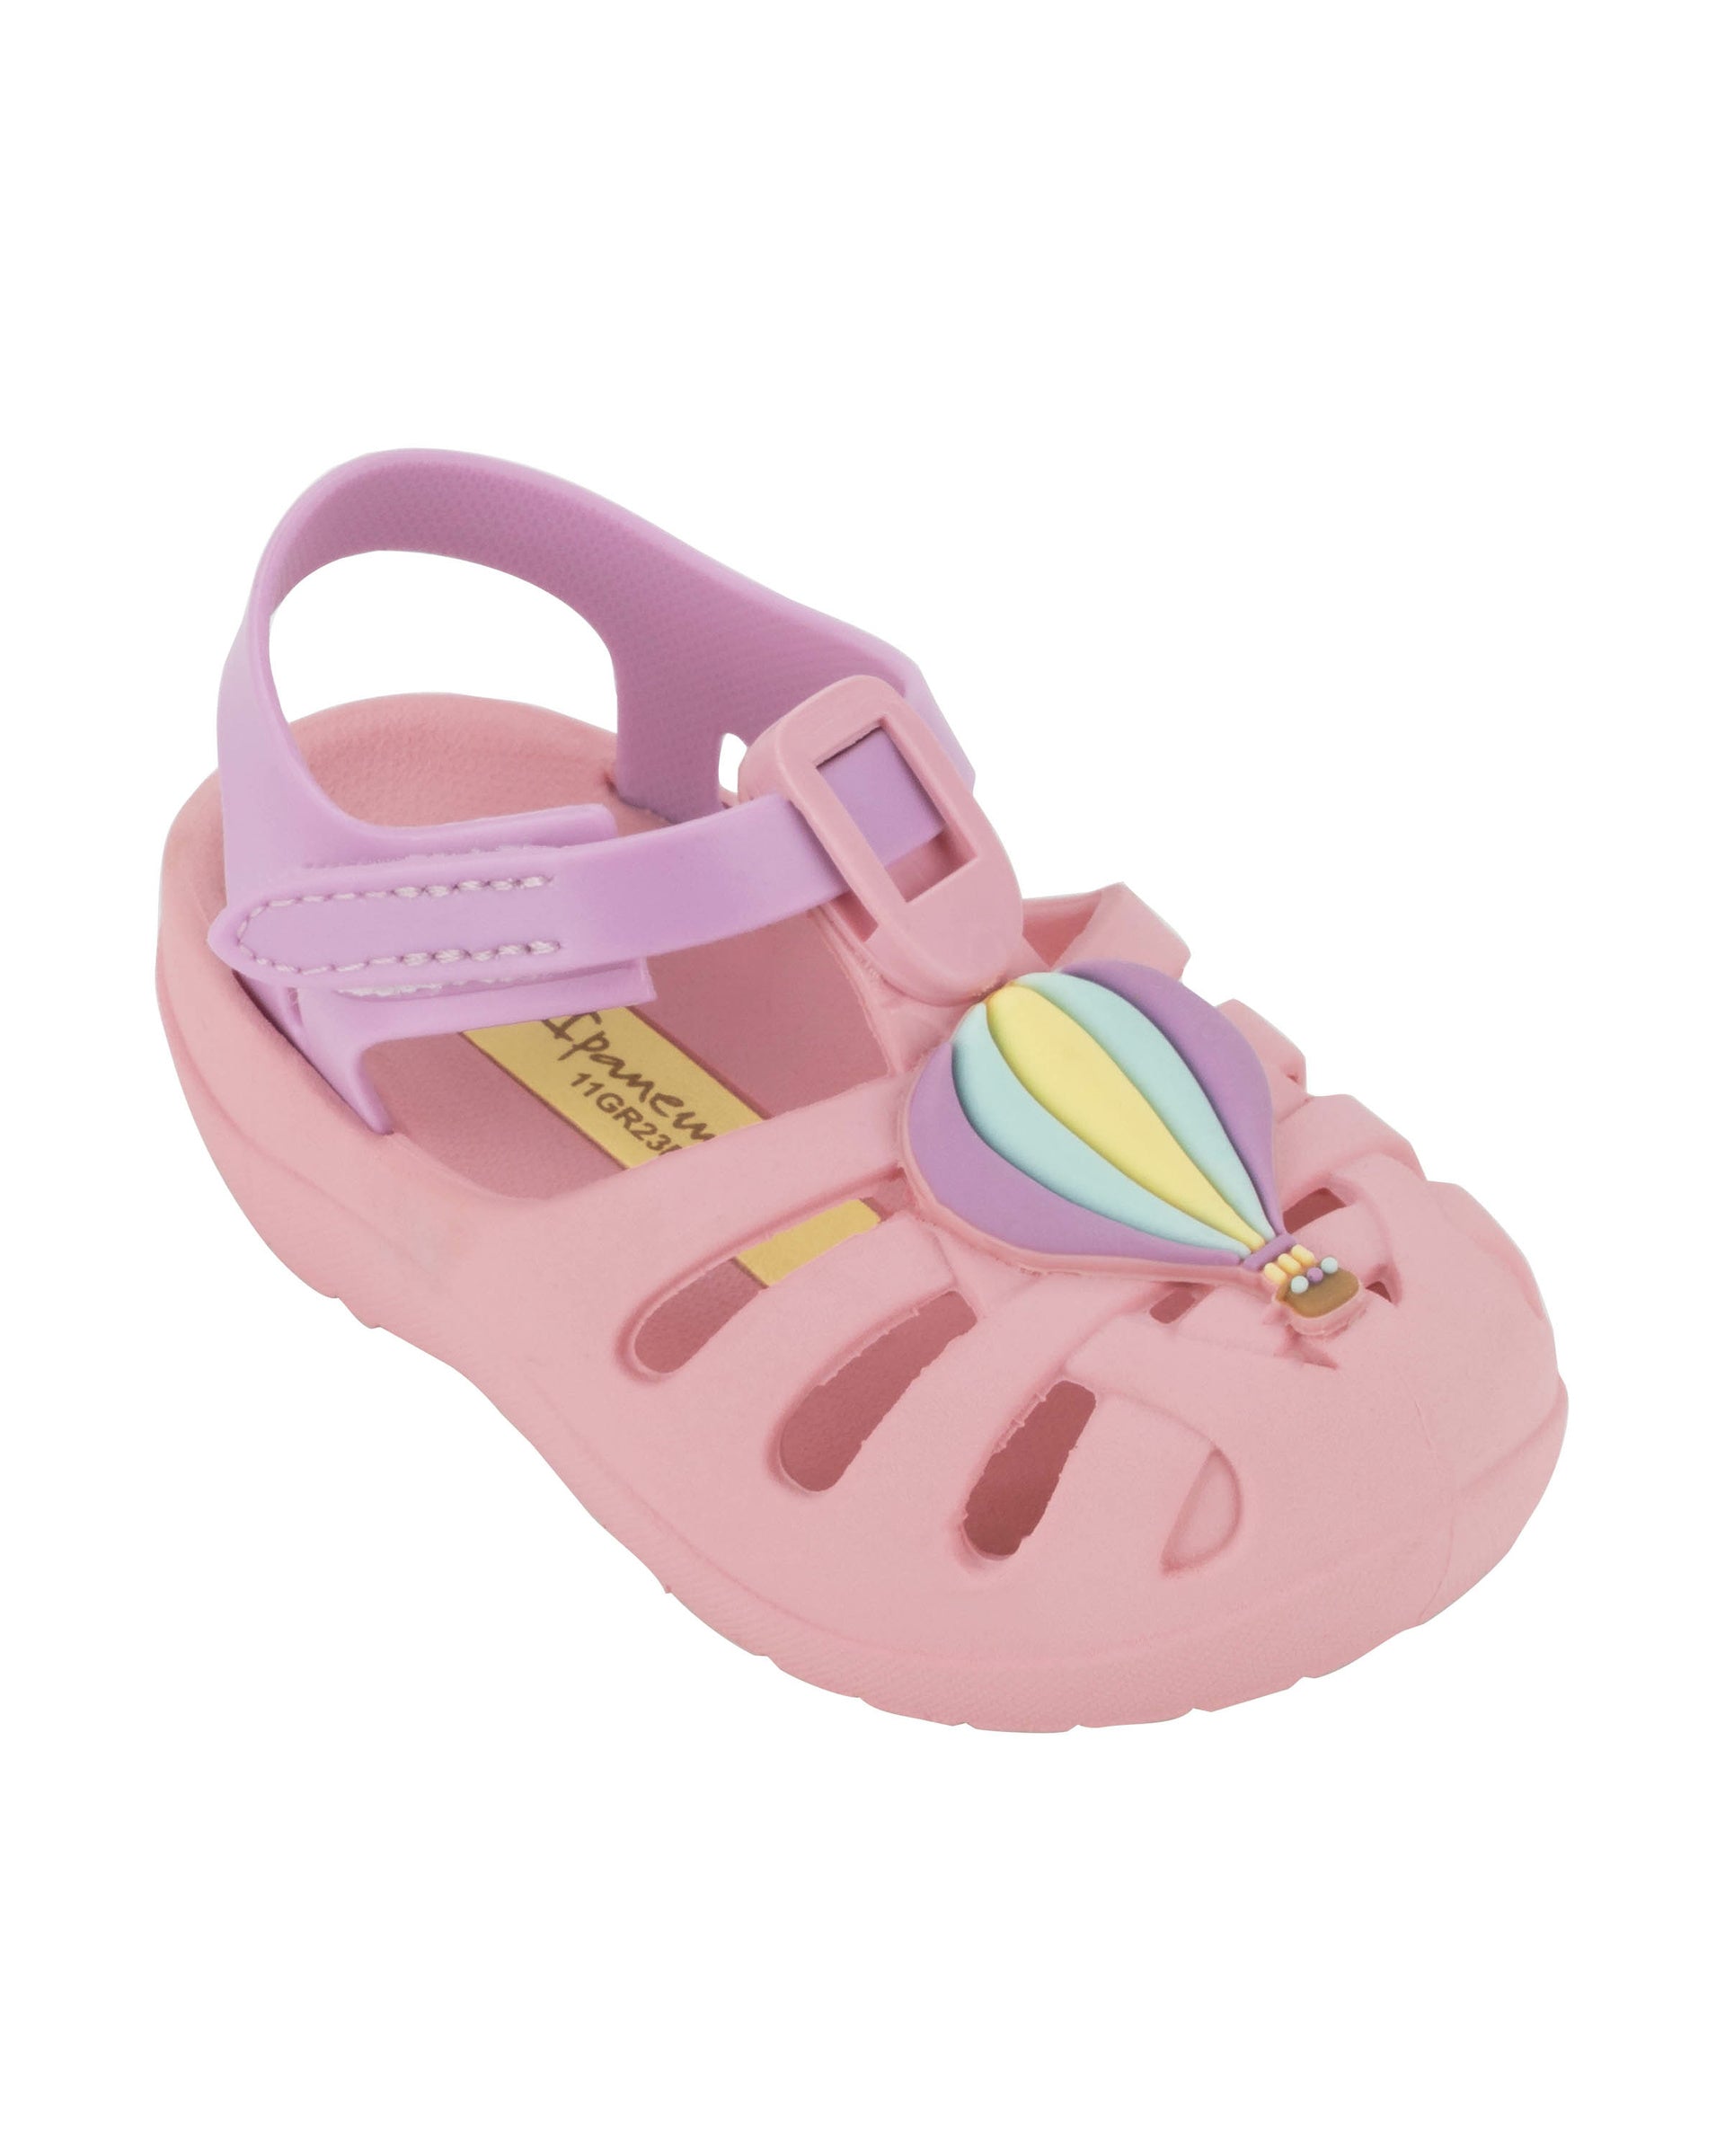 Angled view of a pink Ipanema Summer baby sandal with hot air balloon on the upper.